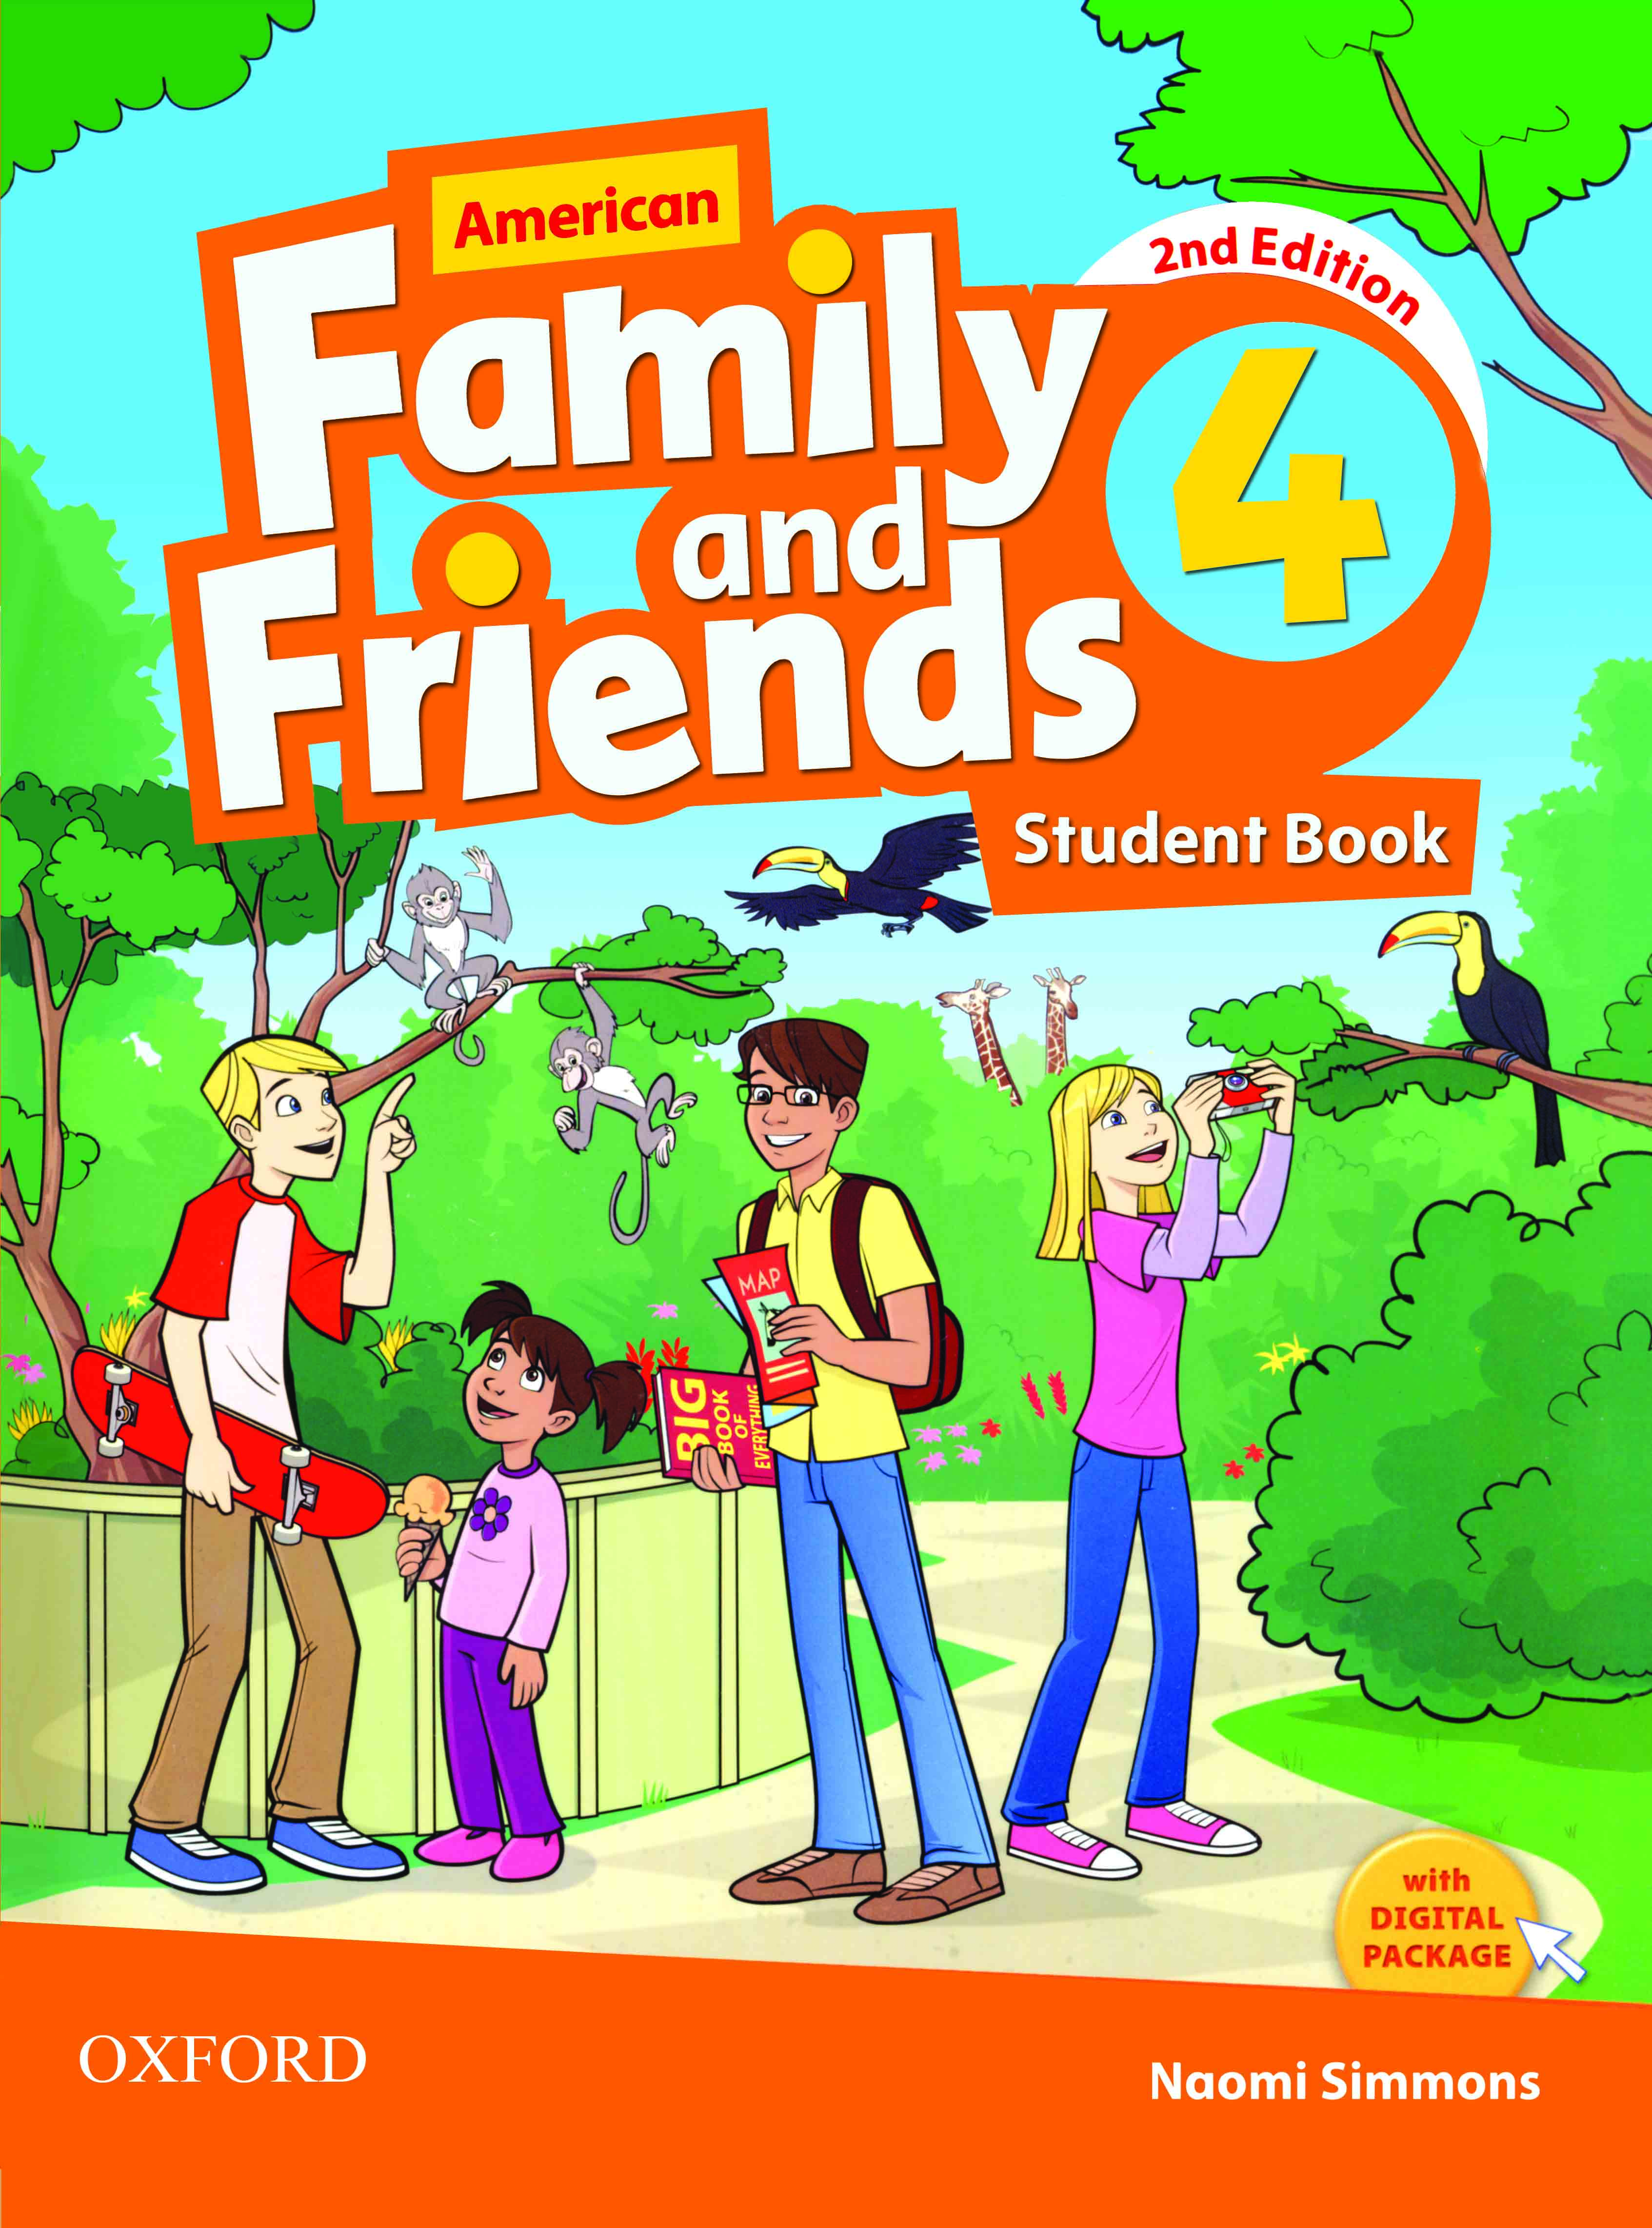 American Family and Friends 4 + Work Book + CD 2nd Edition